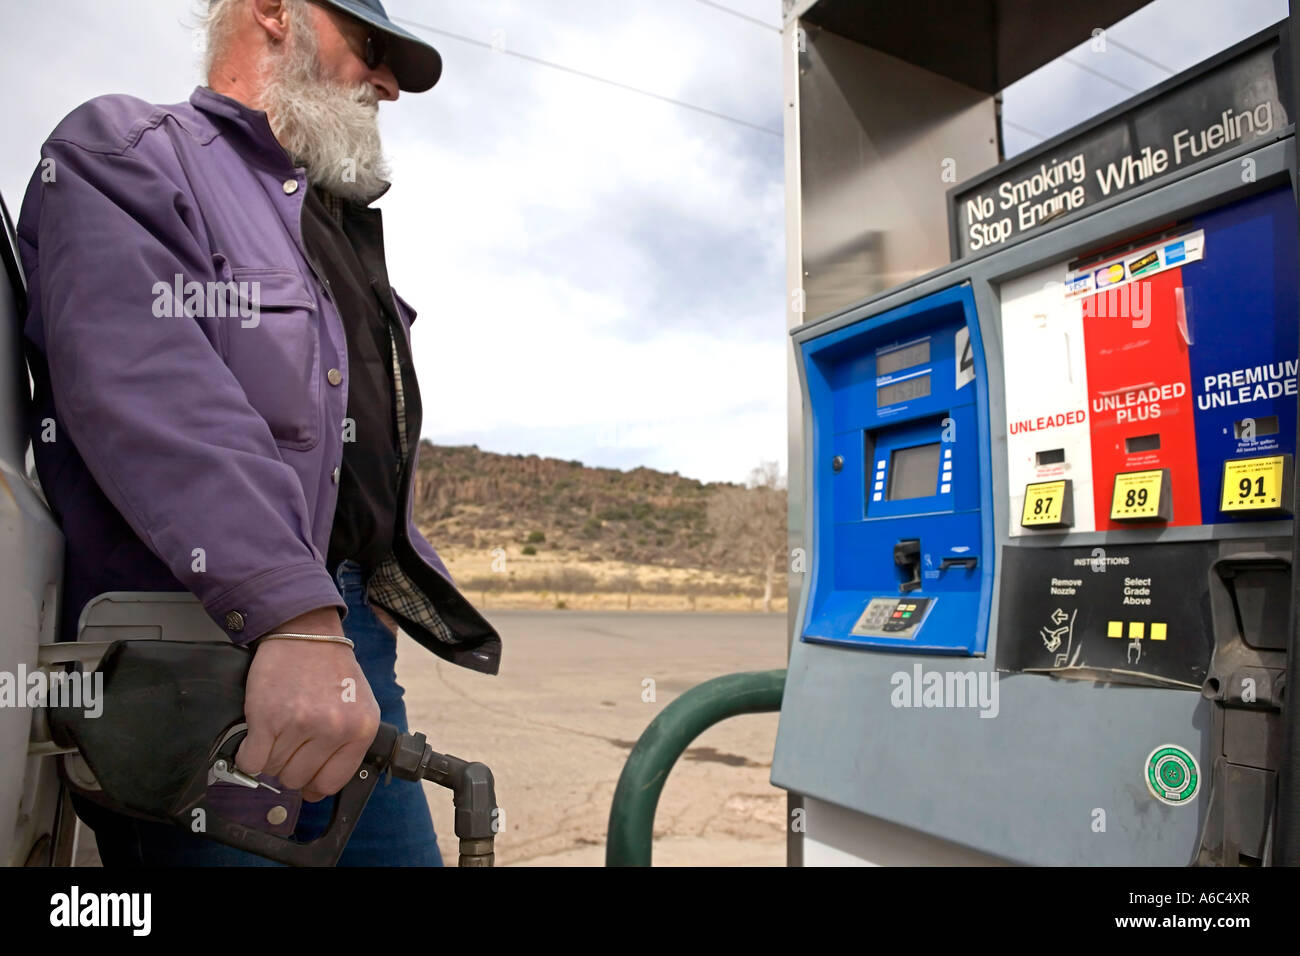 Man pumping gas at a station in West Texas Stock Photo